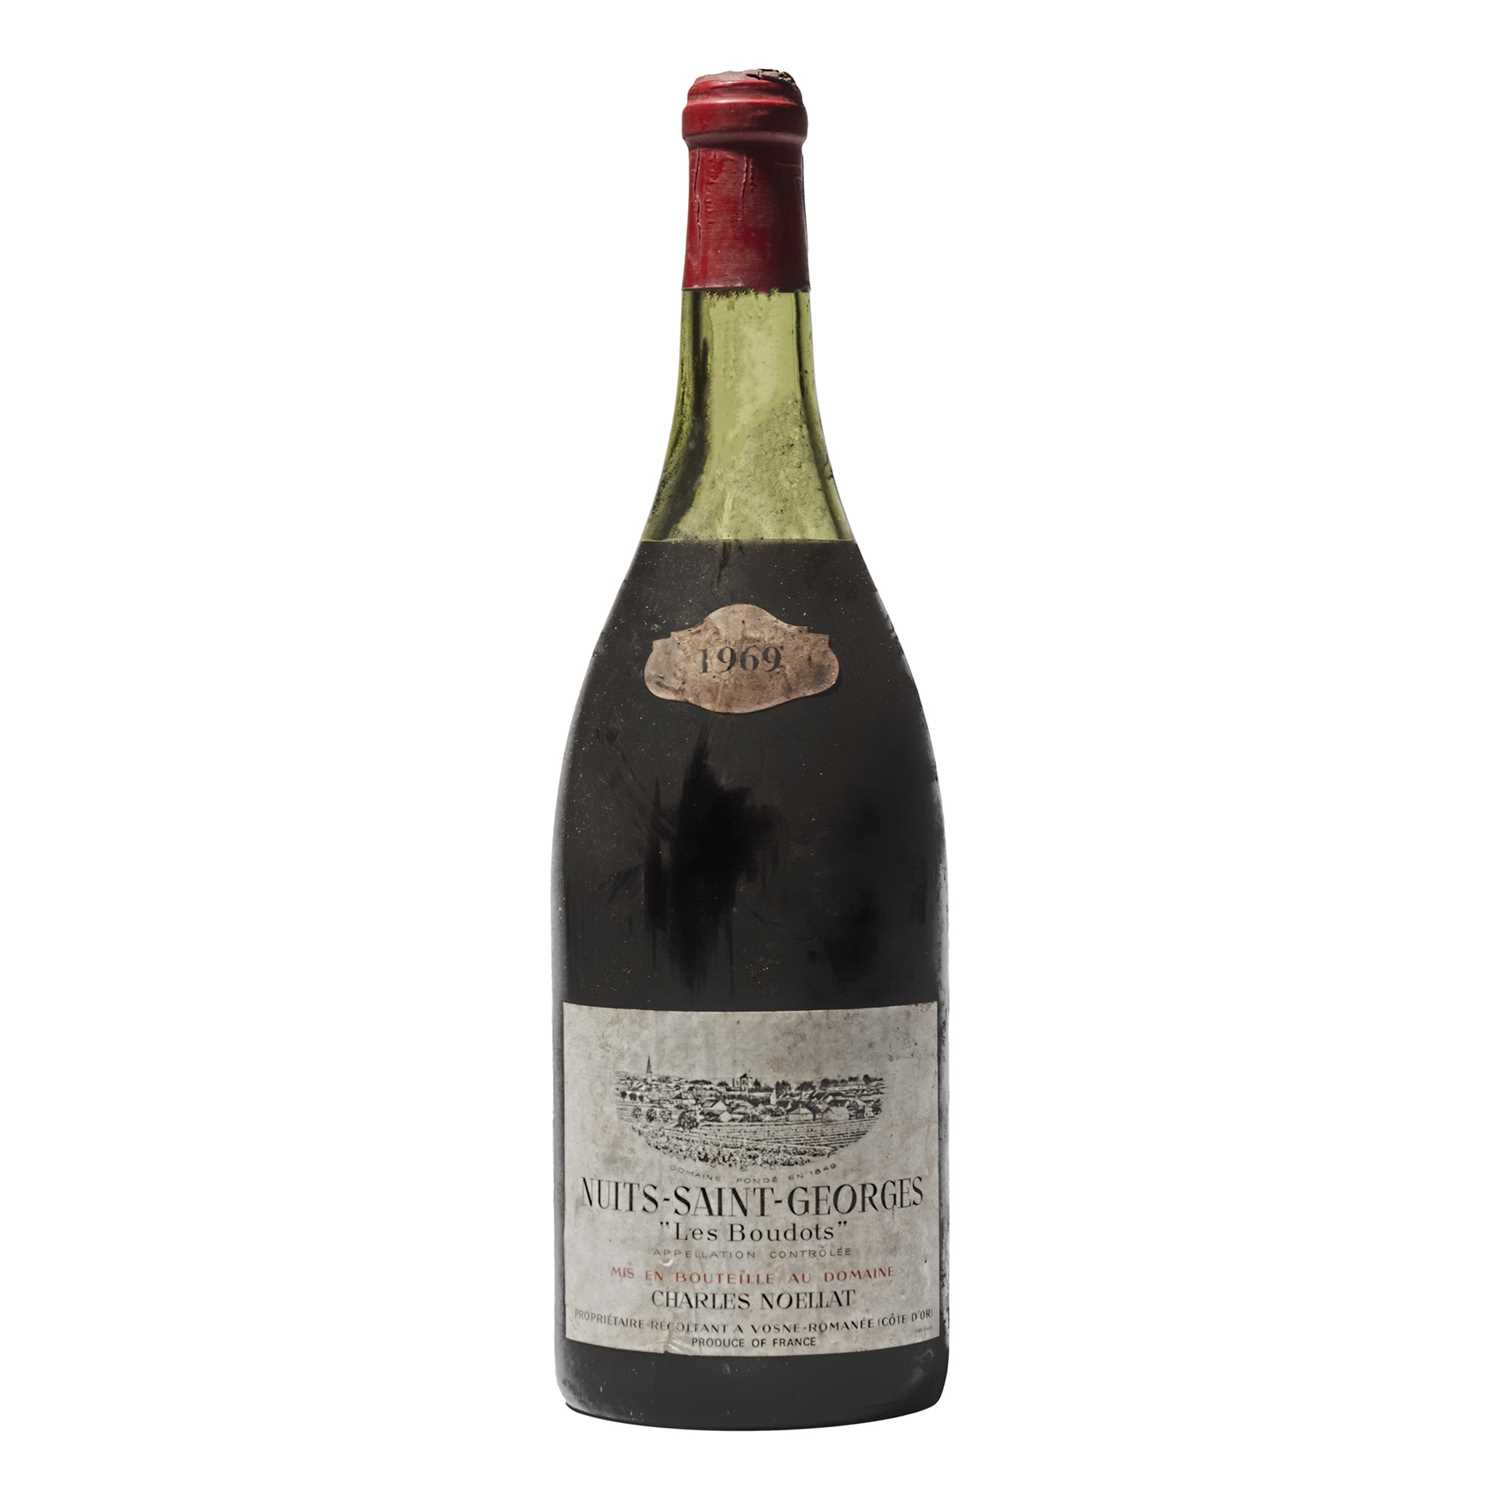 Lot 110 - 1 magnum 1969 Nuits-St.Georges Les Boudots Charles Noellat